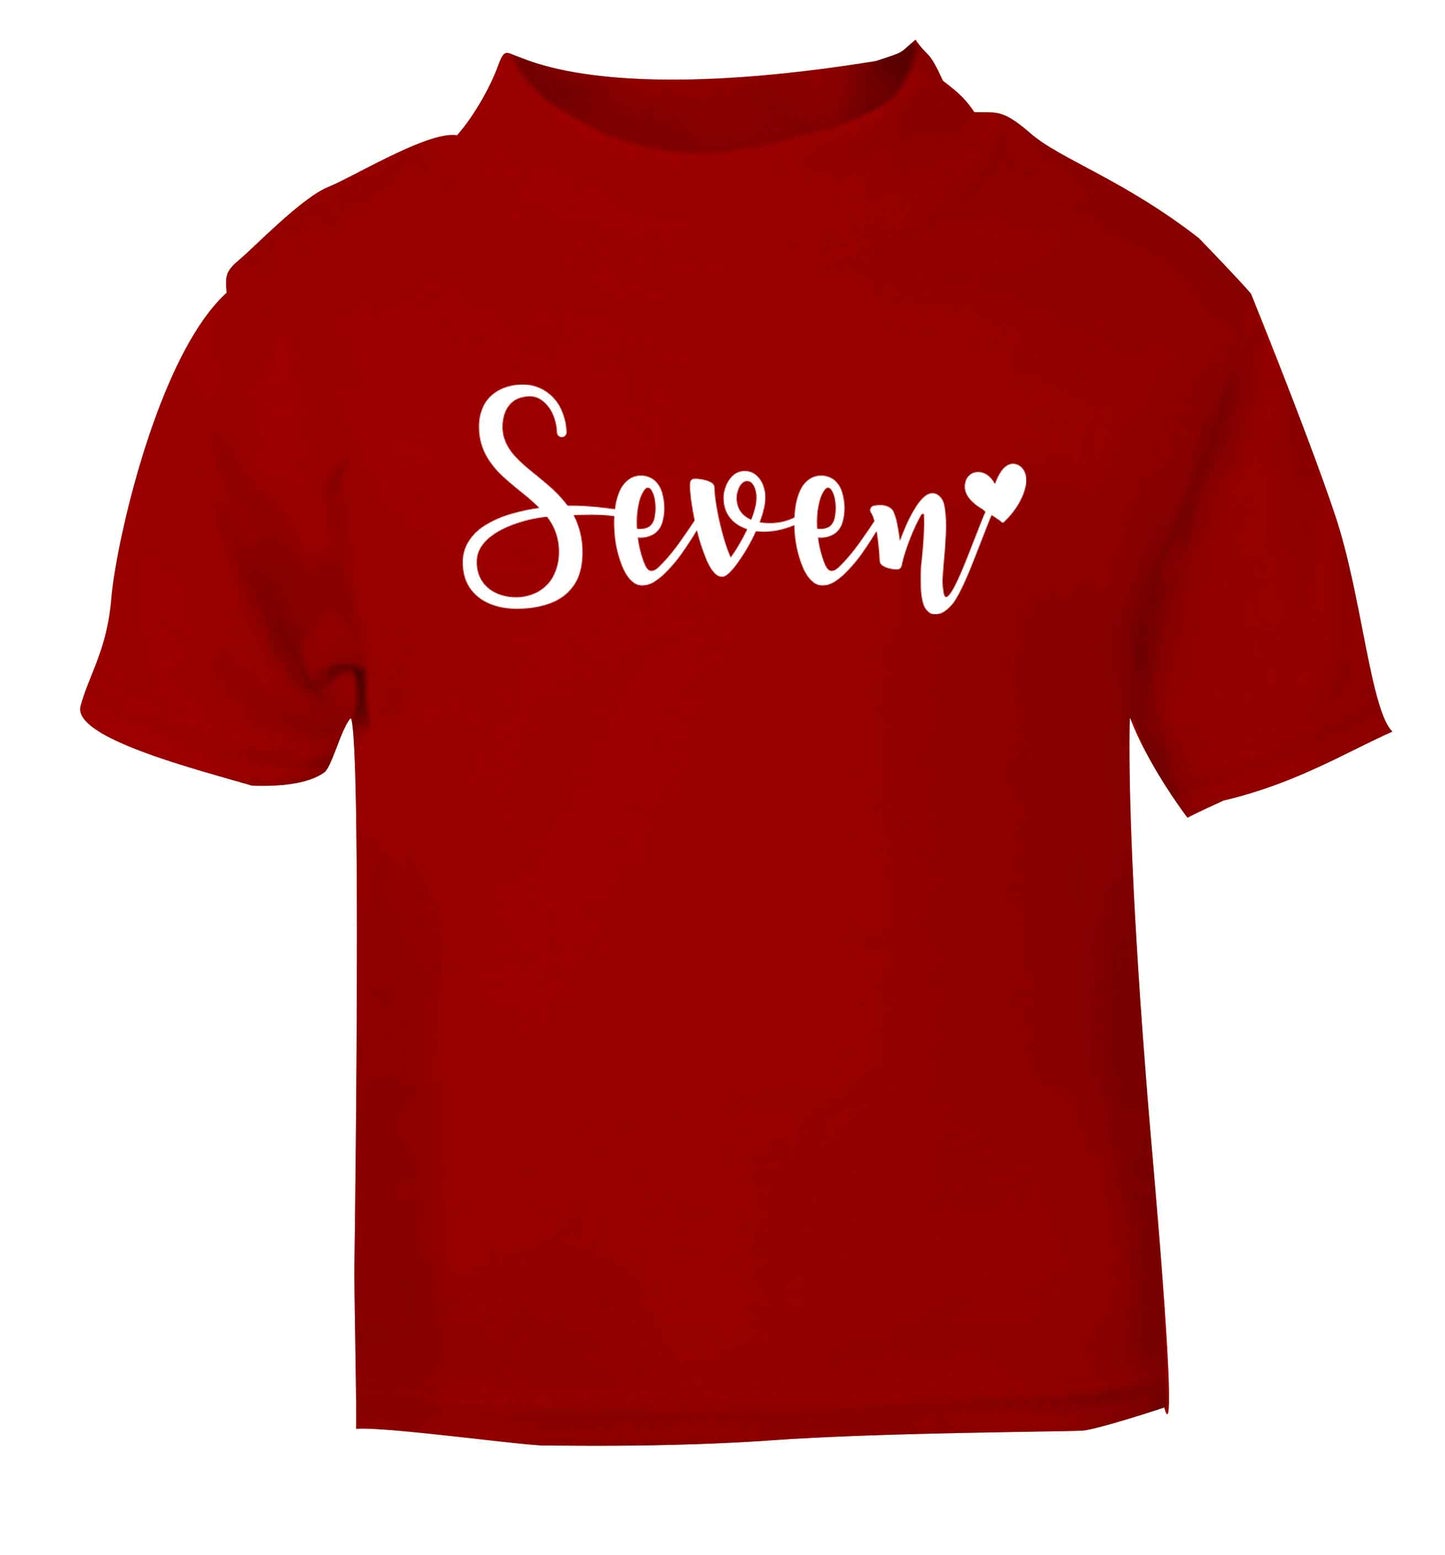 Seven and heart red baby toddler Tshirt 2 Years